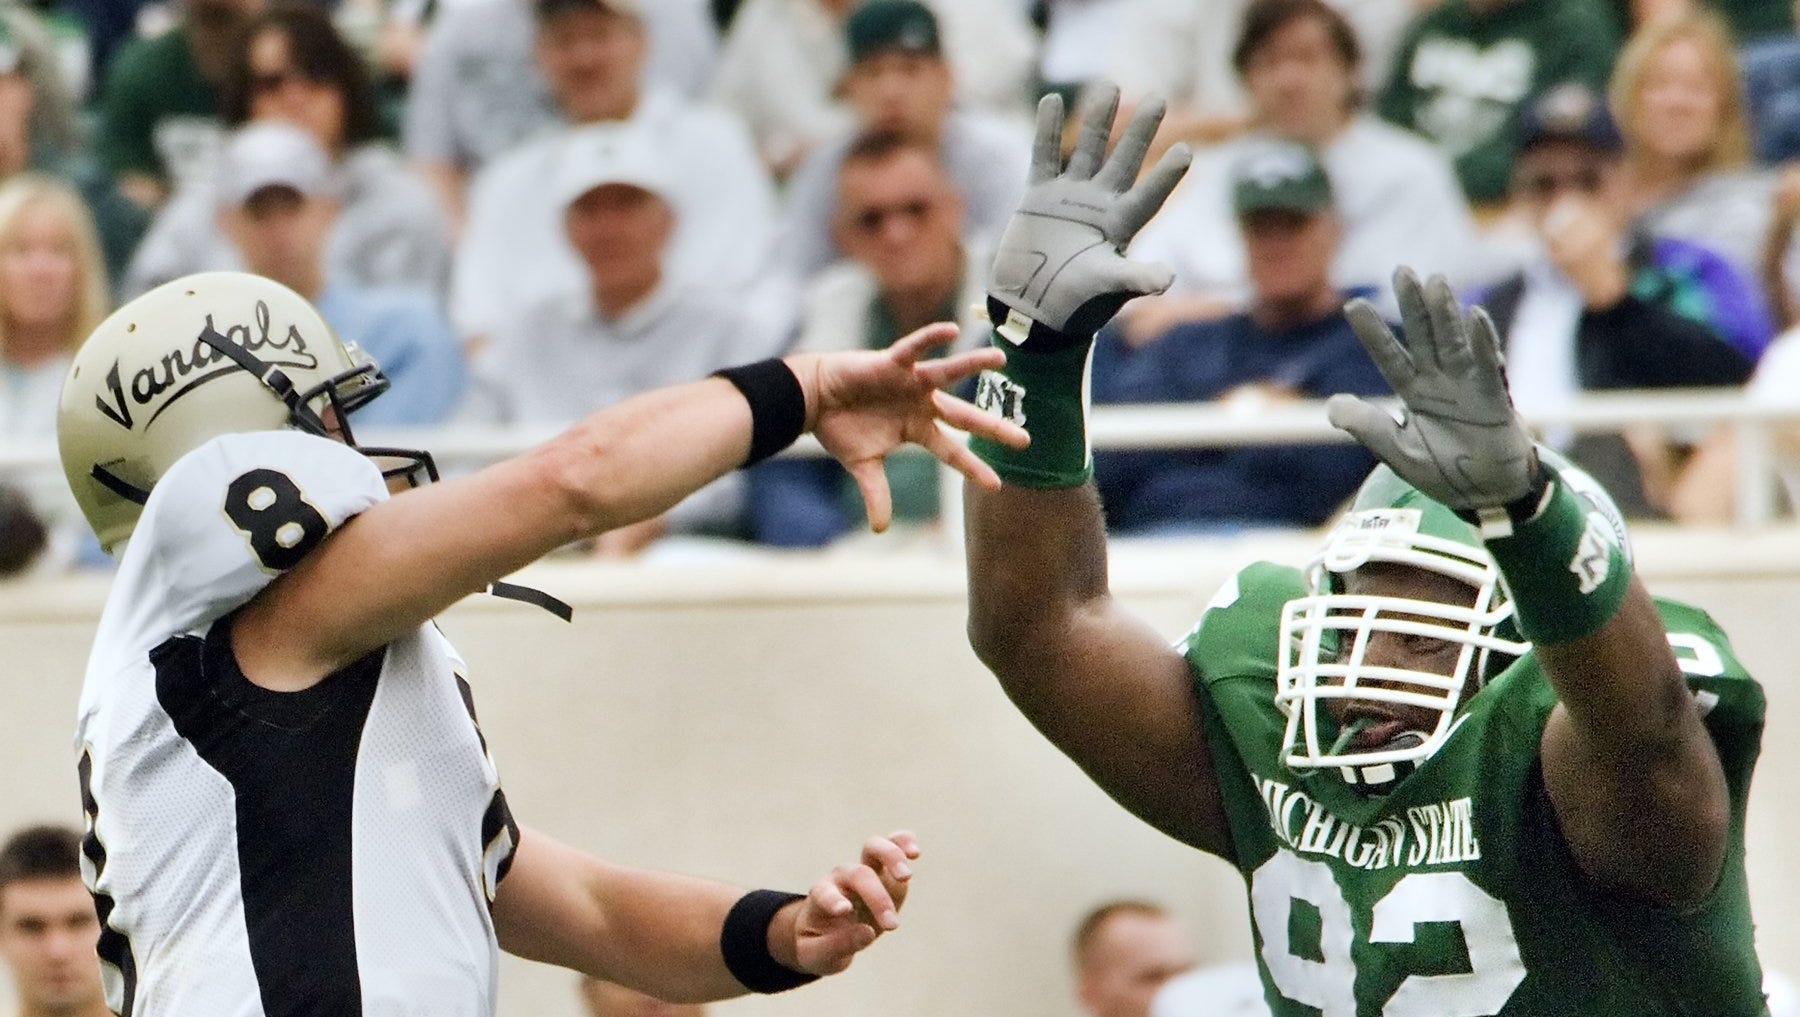 Who wore it best' at Michigan State: No. 92